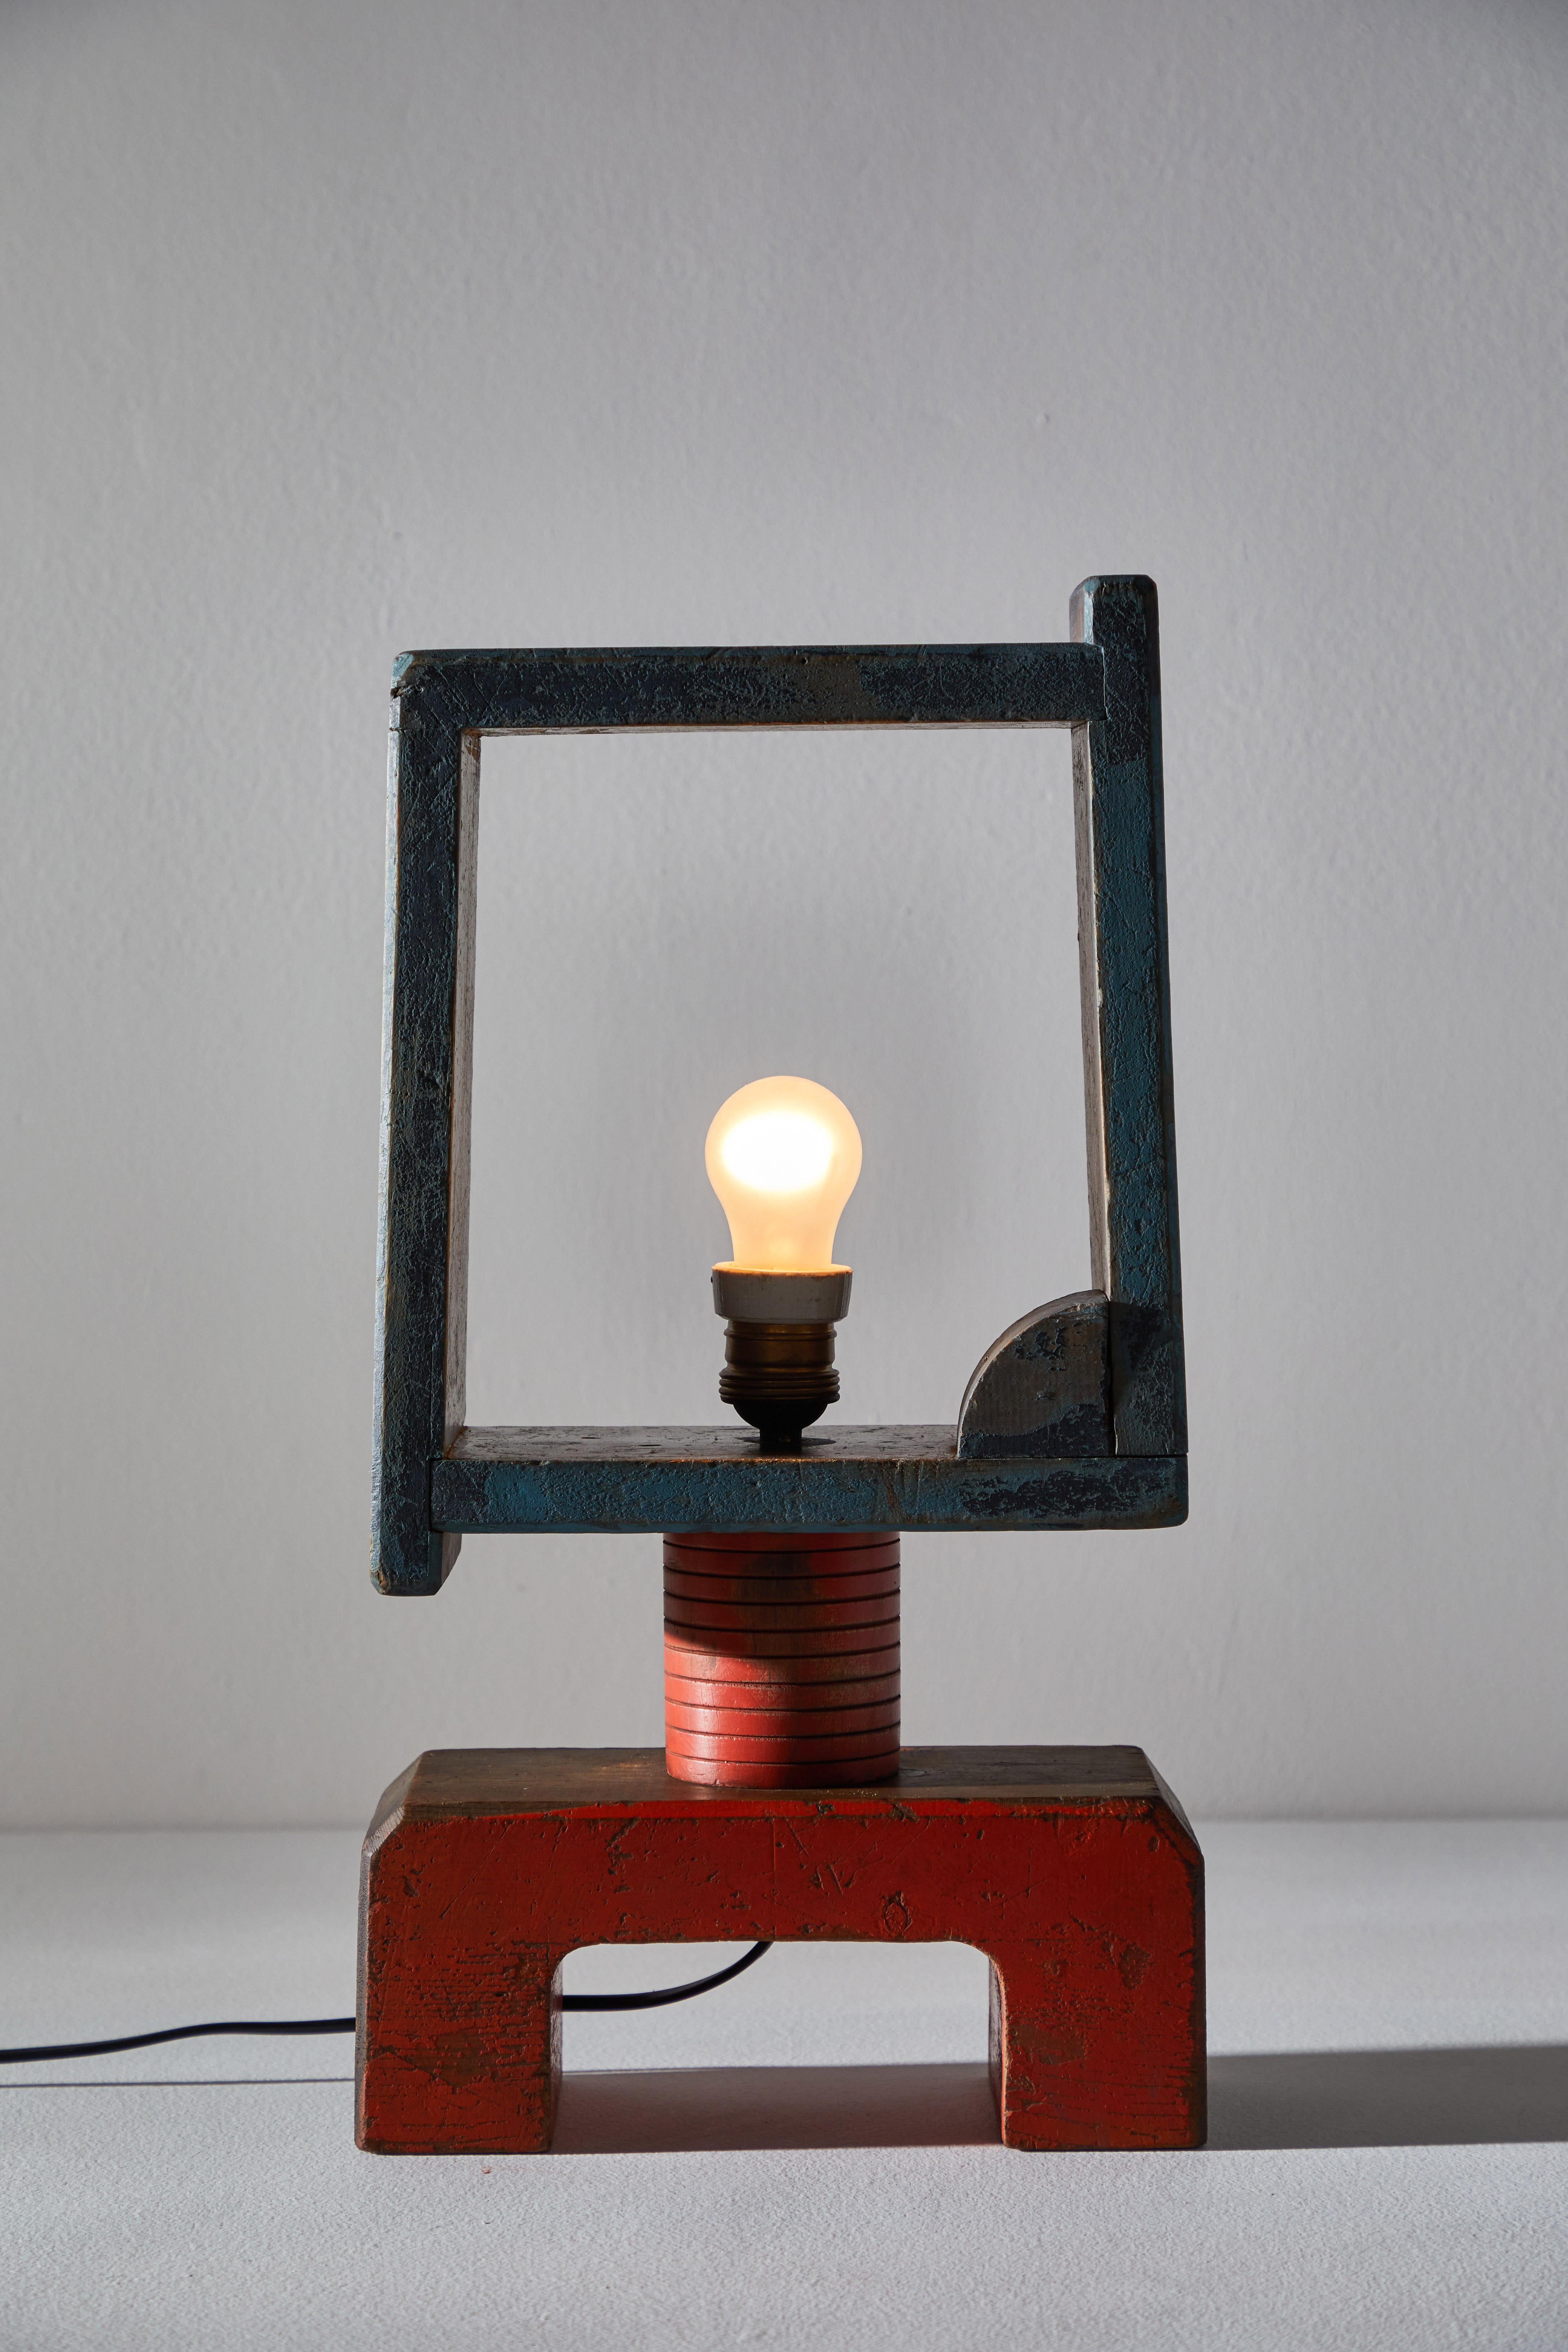 Italian futurist table lamp. Designed and manufactured in Italy, circa 1930s. Hand painted wood, original cord, rewired for U.S. sockets. Shade rotates 360 degrees. Custom inner shade available upon request for an additional fee. Takes one E27 60w